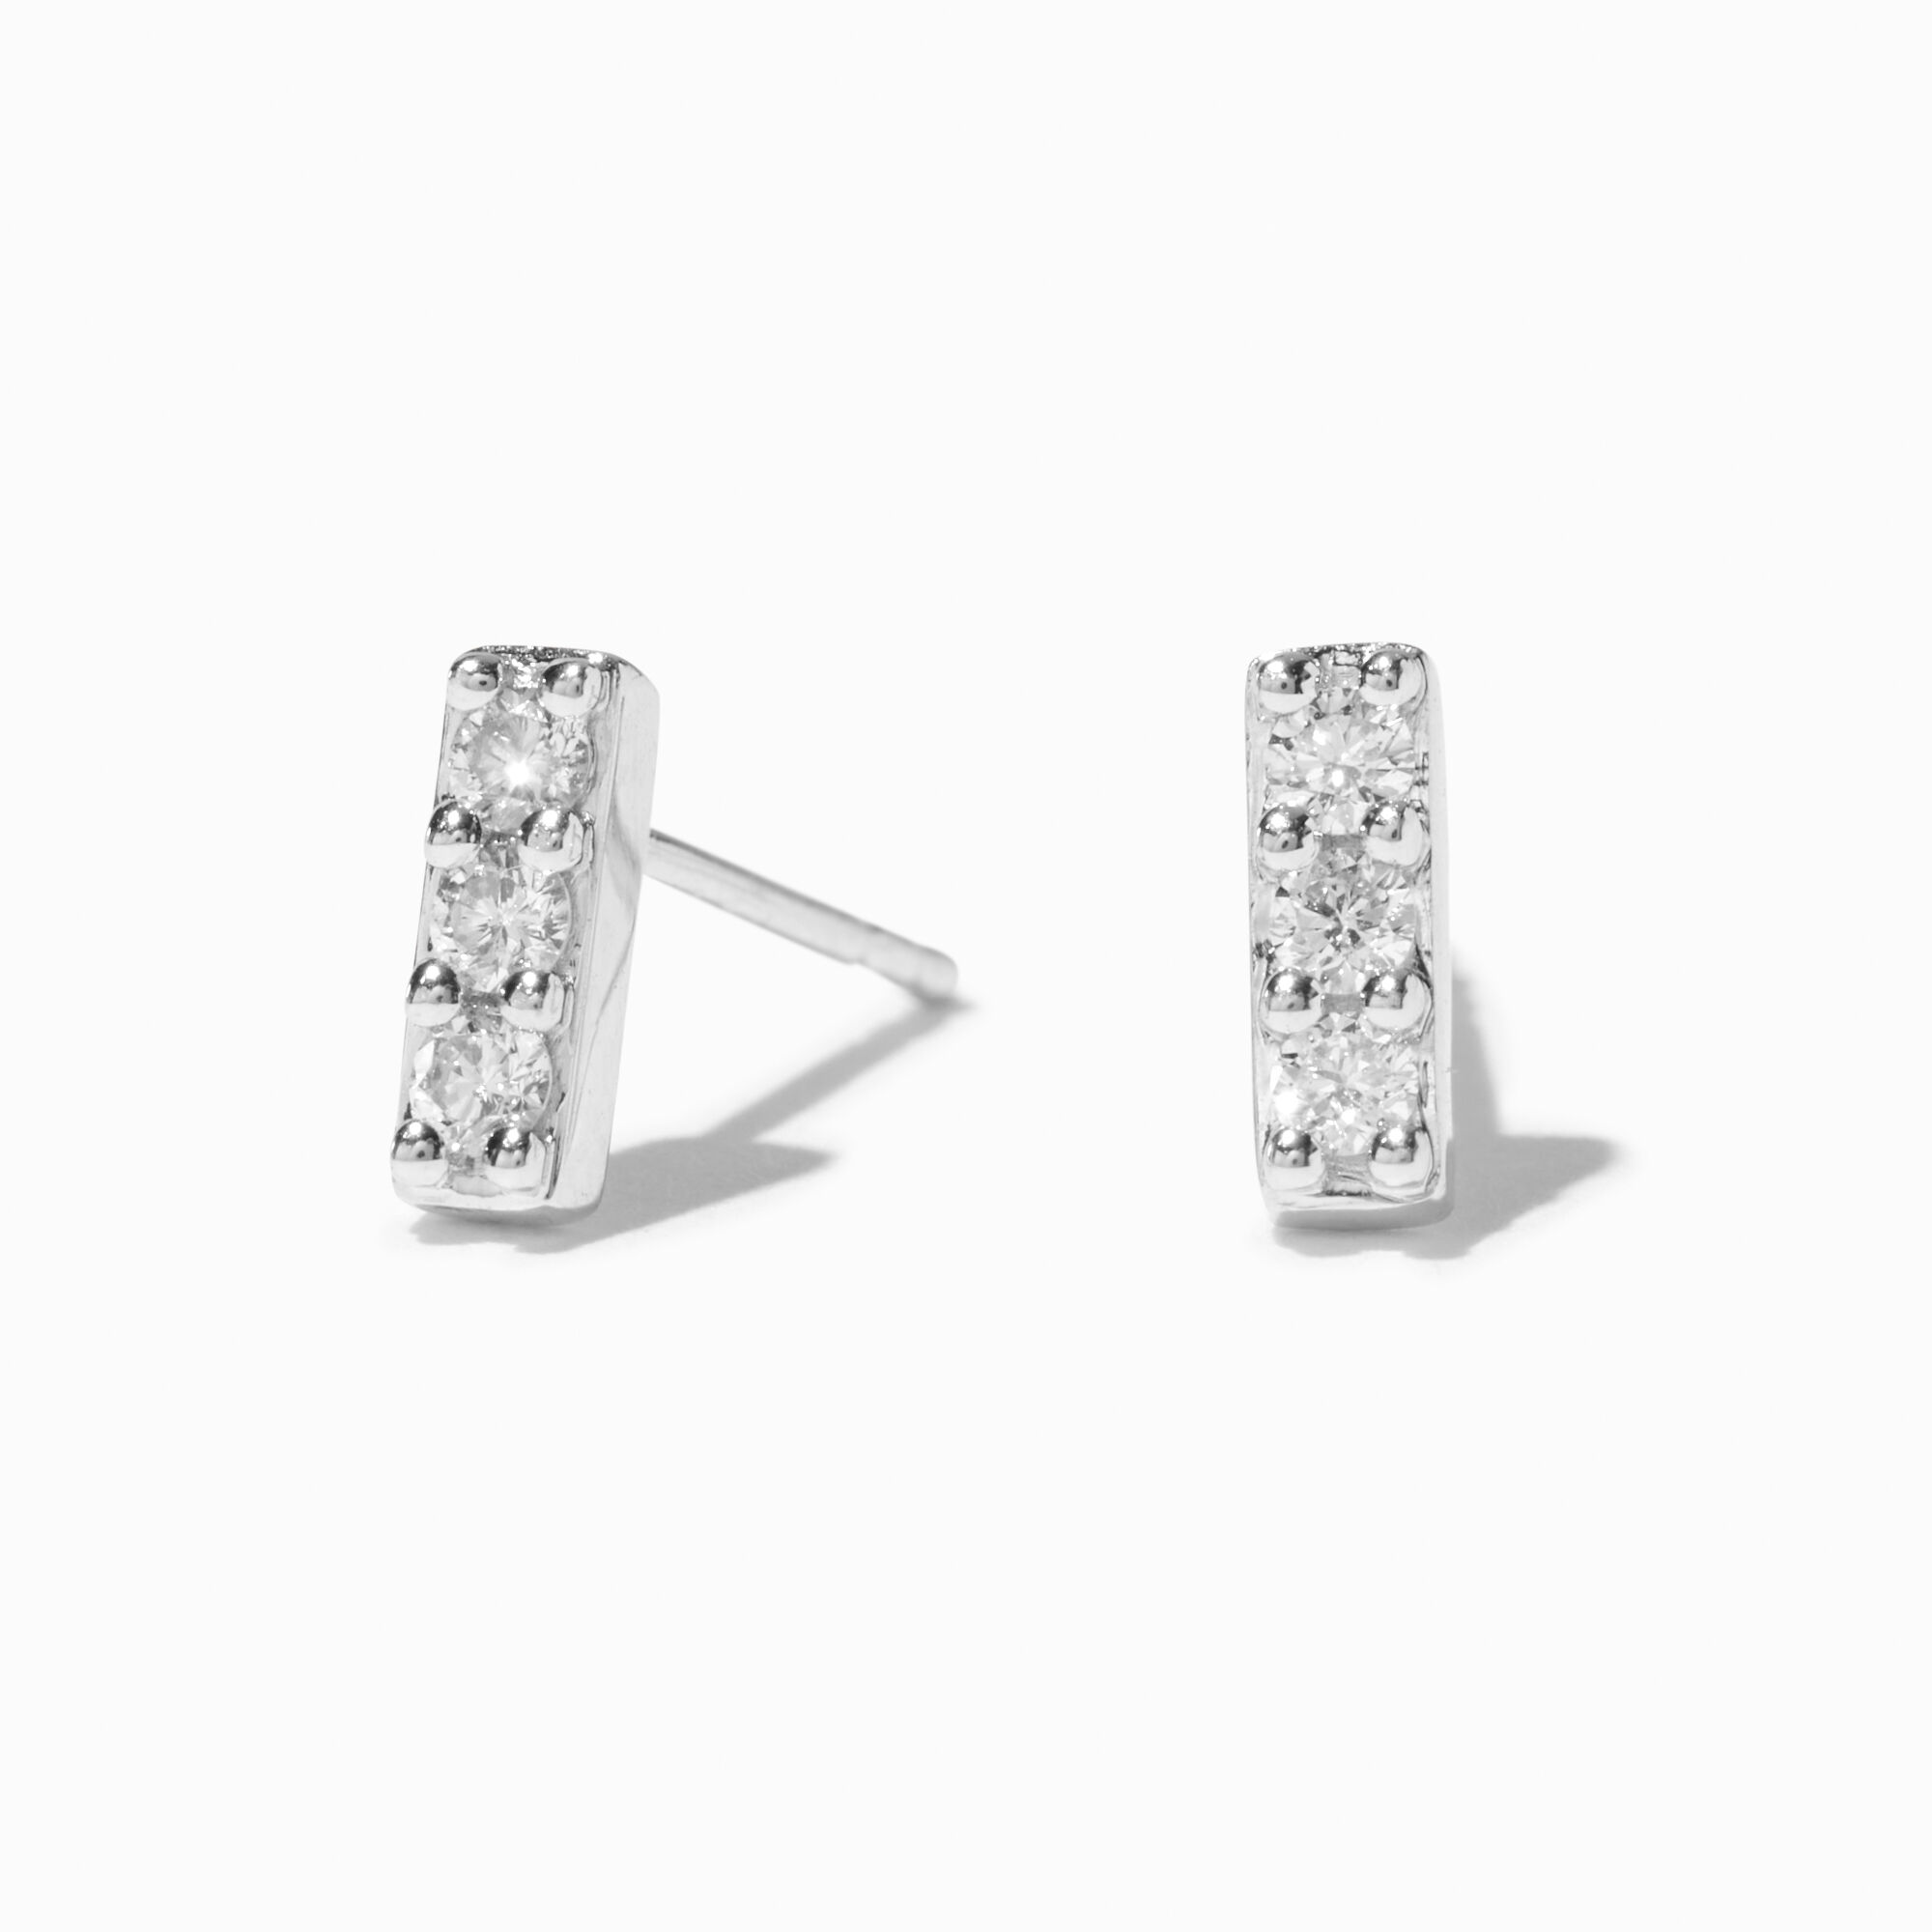 View C Luxe By Claires 16 Ct Tw Laboratory Grown Diamond 2MM Bar Stud Earrings Silver information